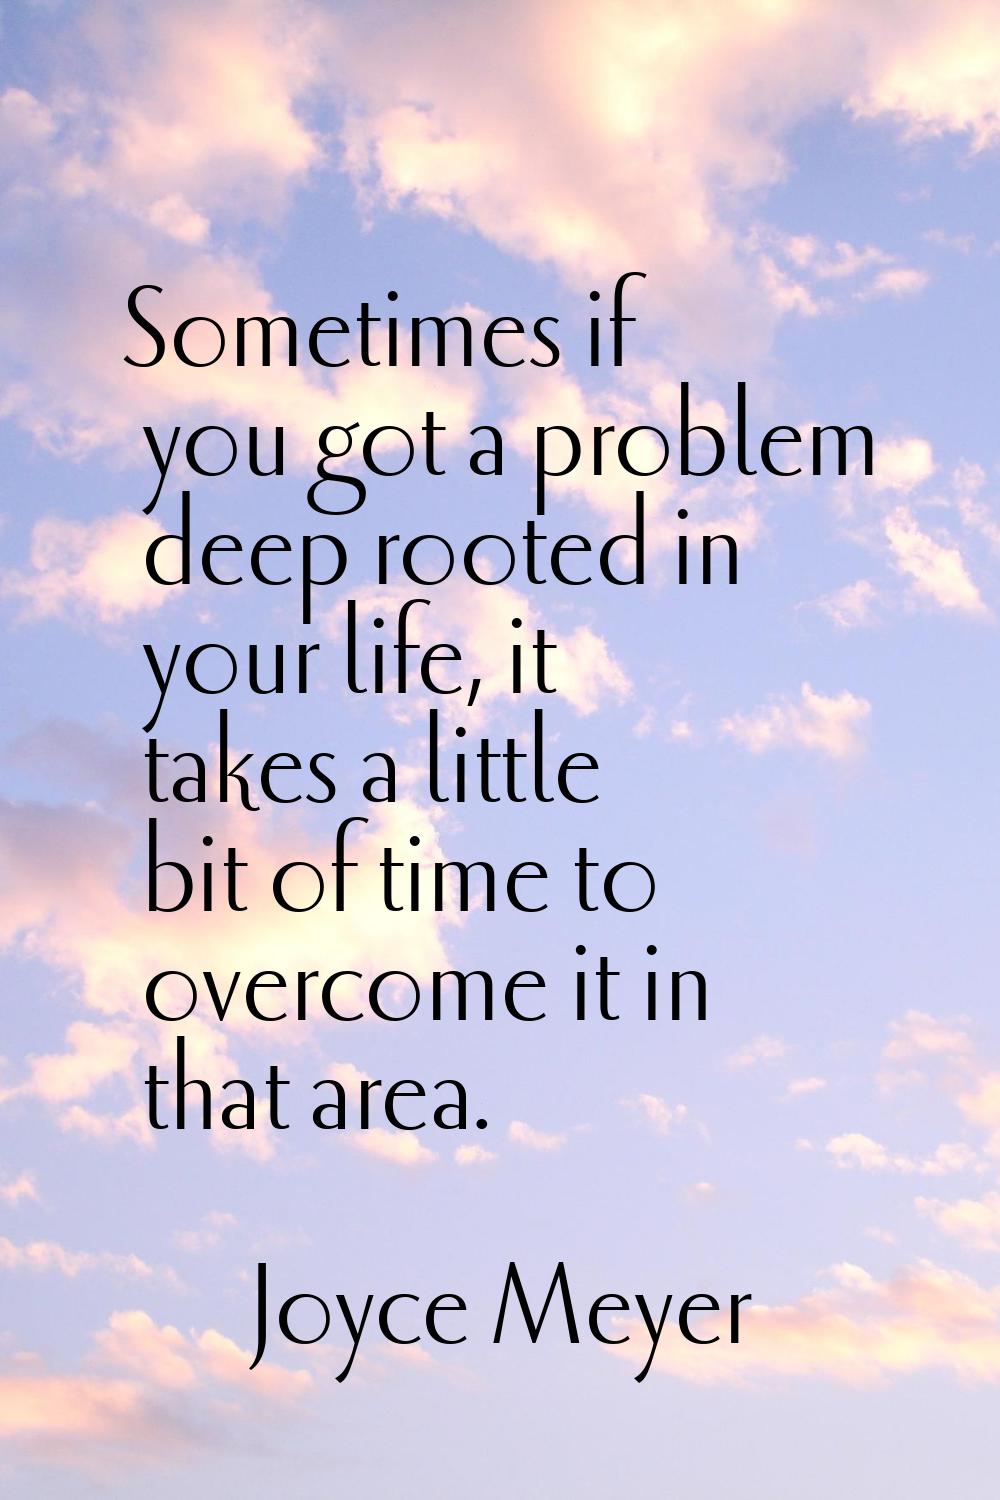 Sometimes if you got a problem deep rooted in your life, it takes a little bit of time to overcome 